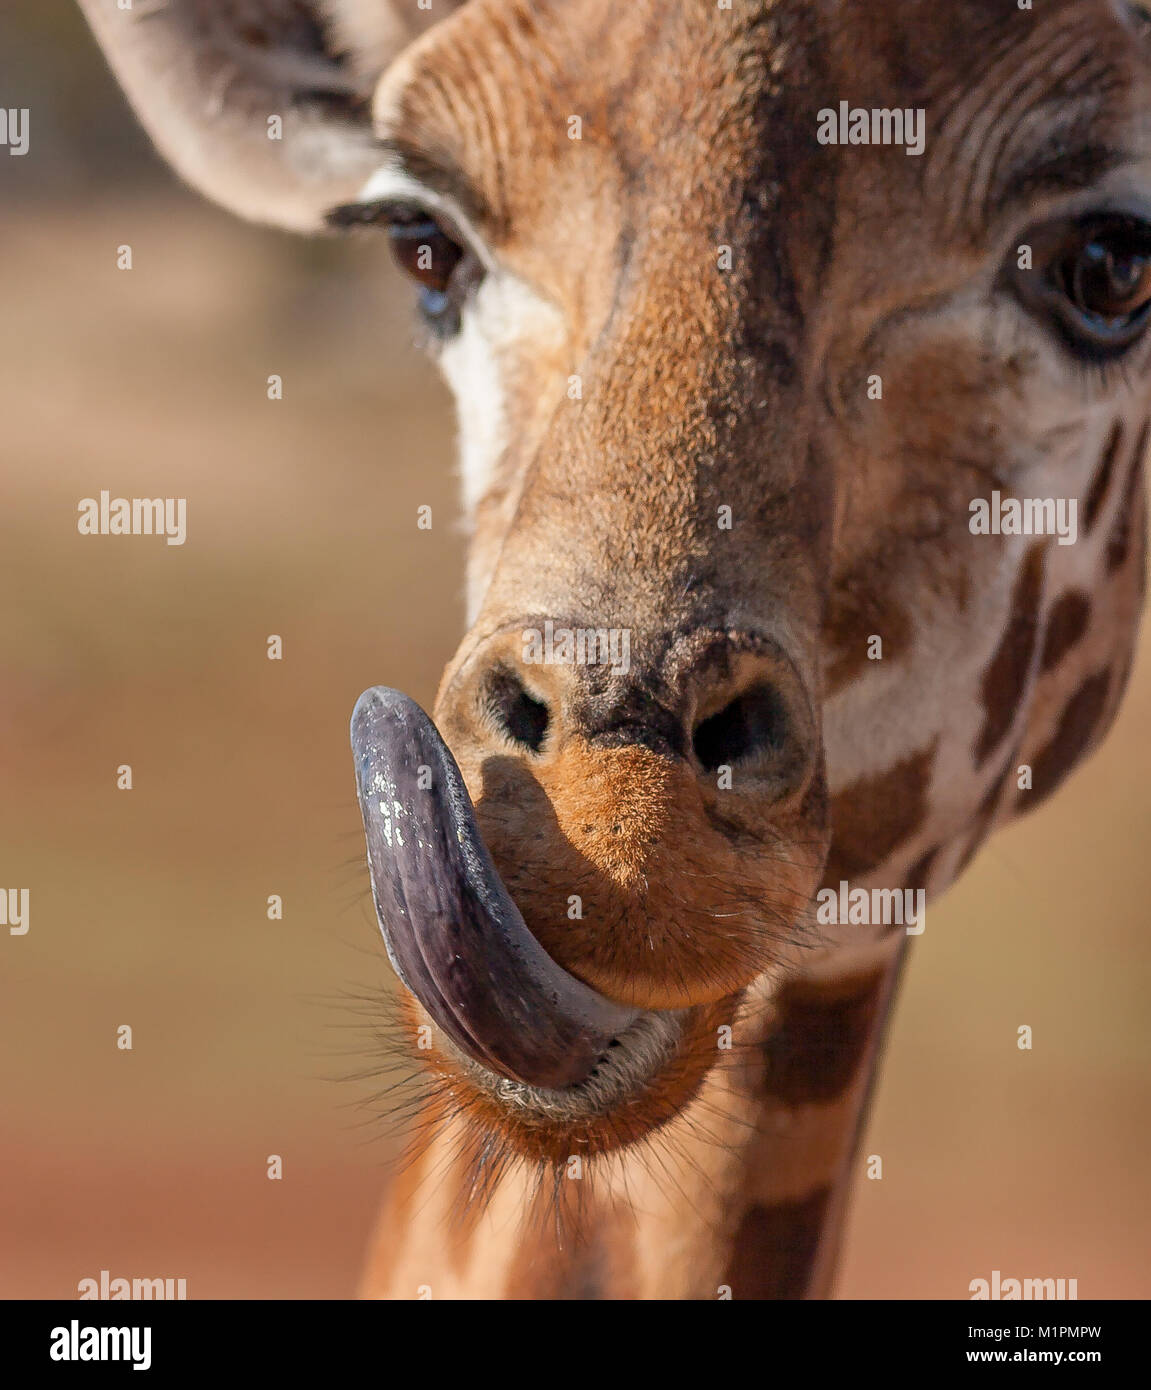 The blue tongue of the giraffe is thought to protect its tongue from sunburn. Stock Photo